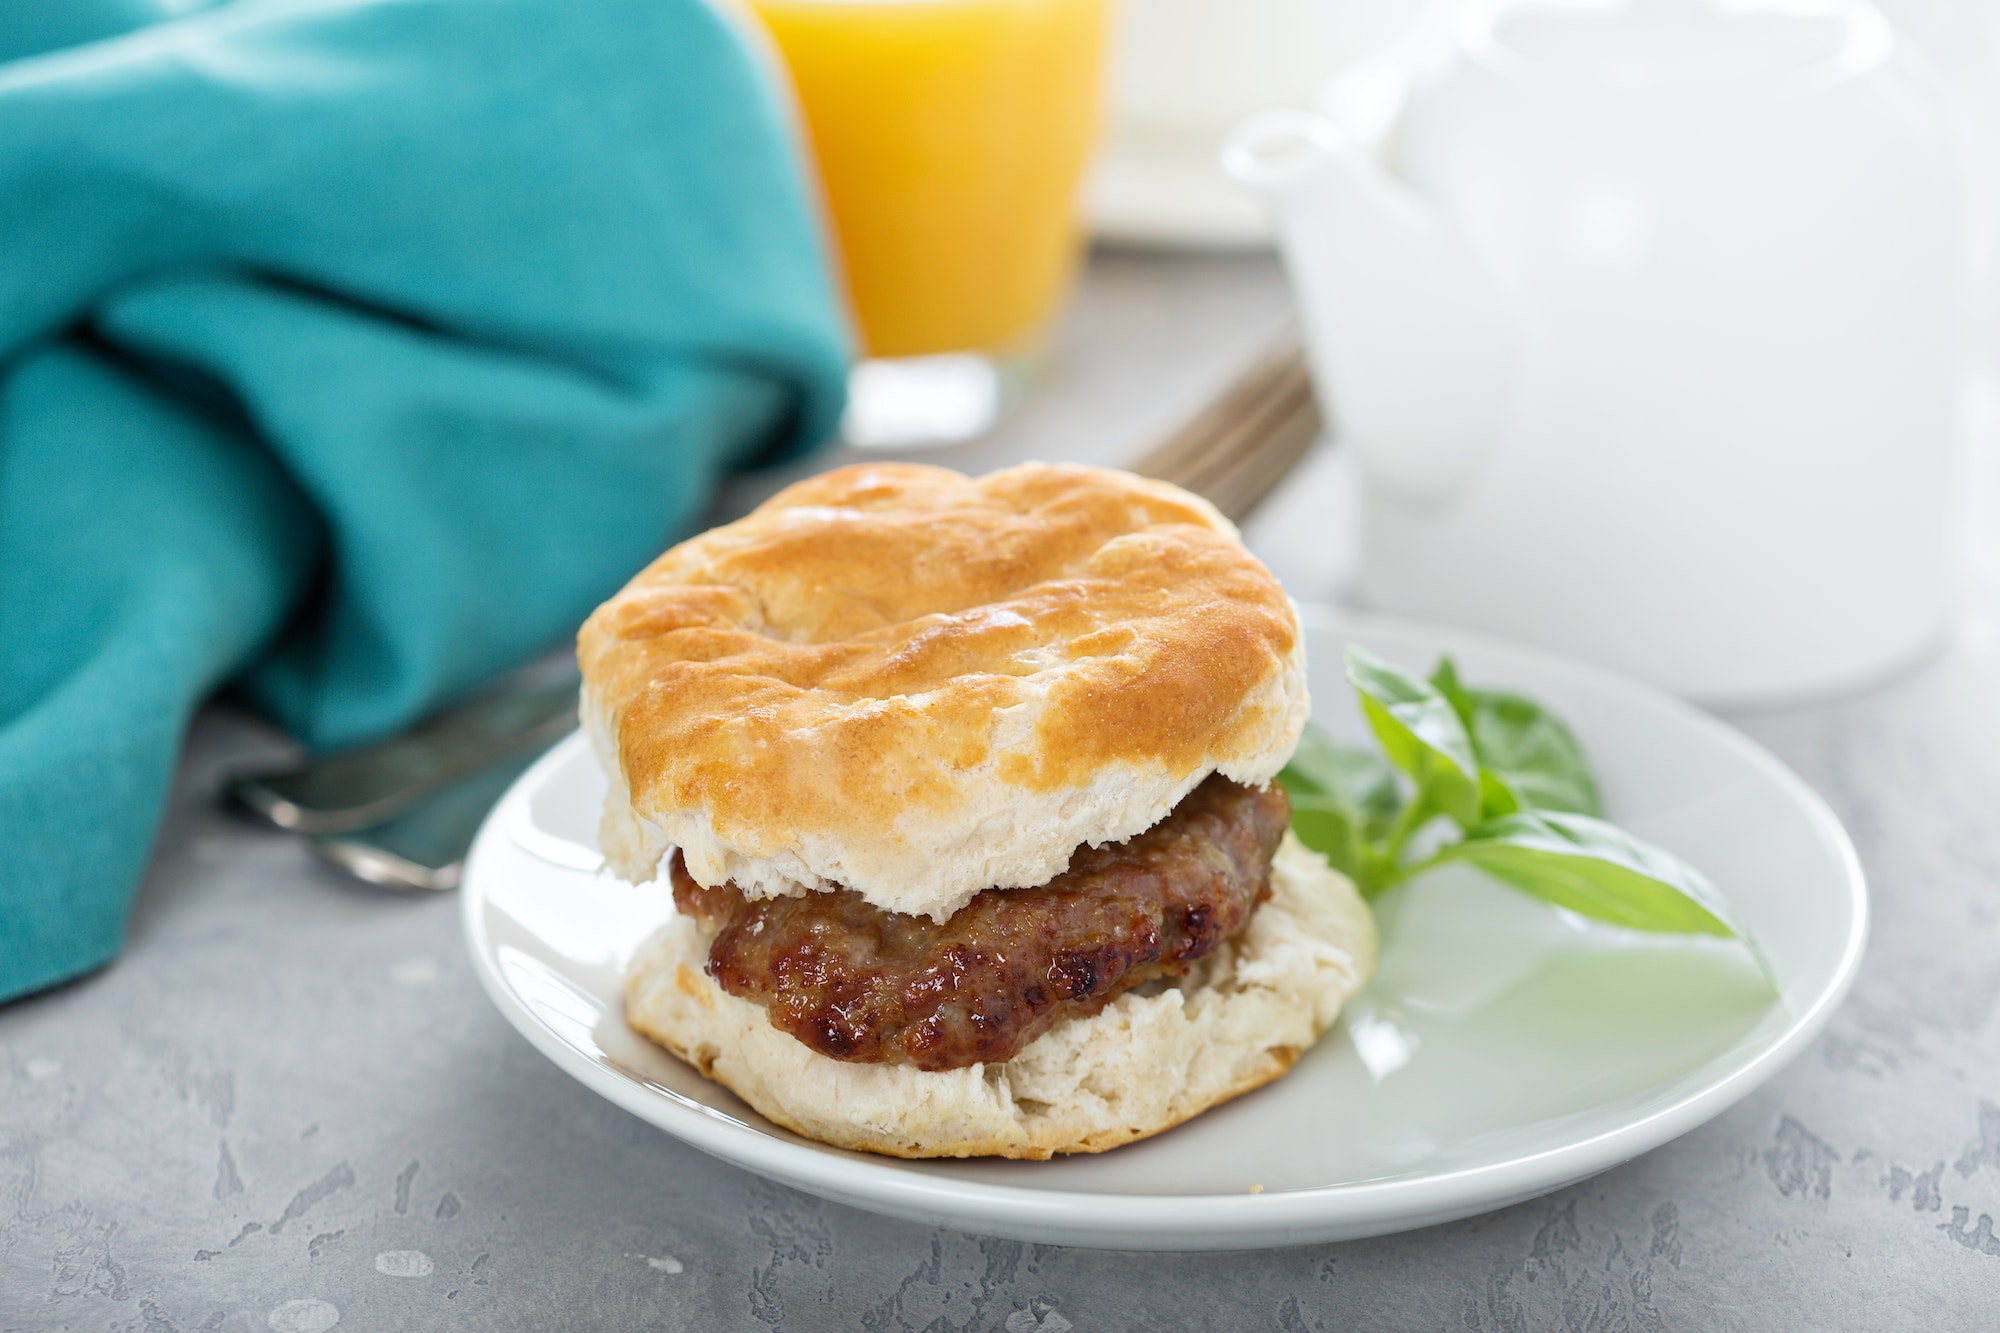 Breakfast biscuit with sausage